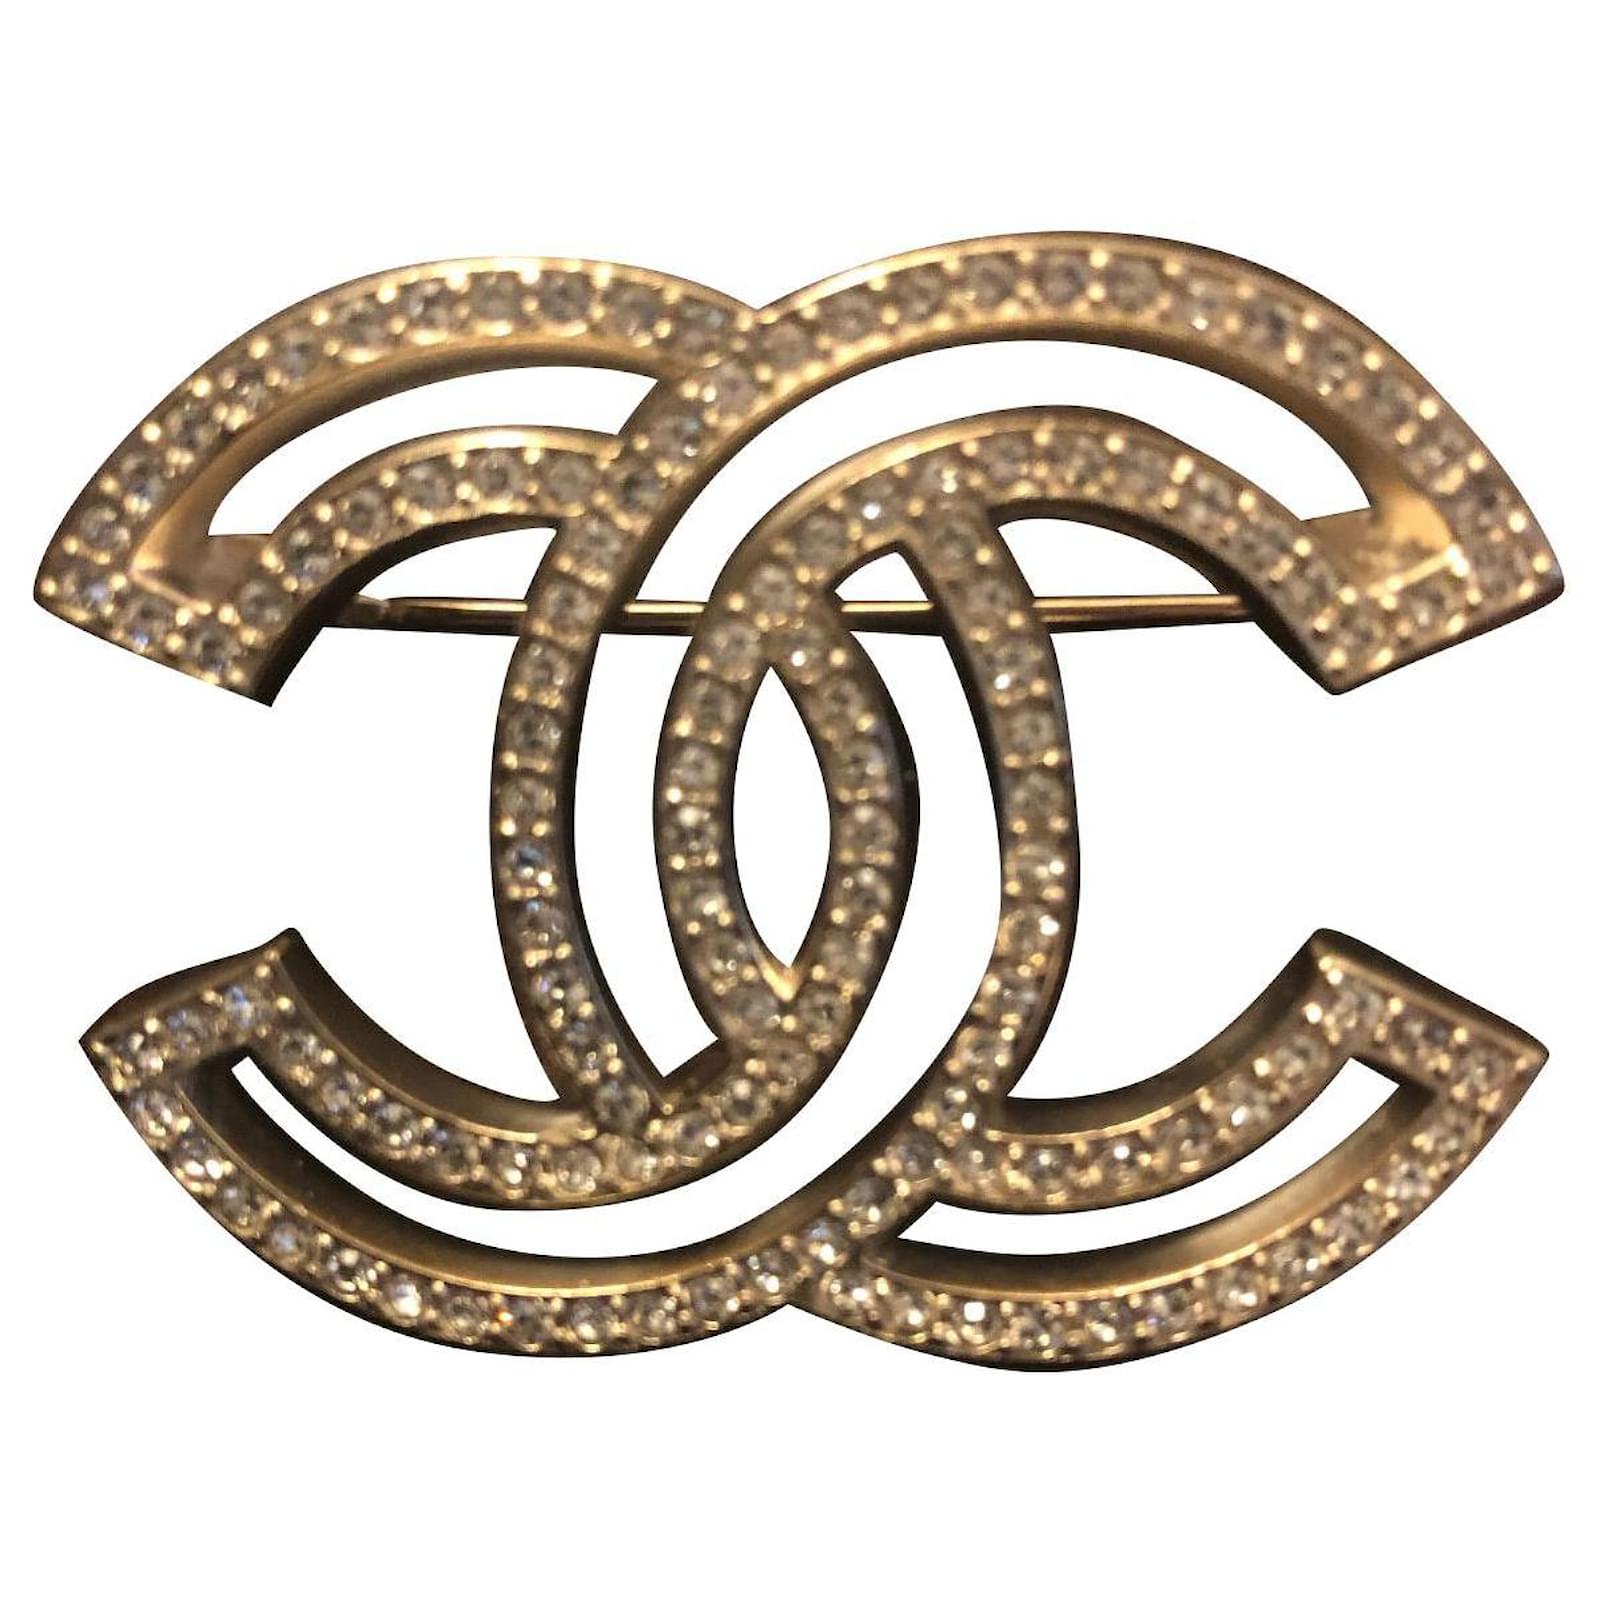 NEW CHANEL BROOCH CC LOGO & STRASS SQUARE IN GOLD METAL NEW GOLDEN